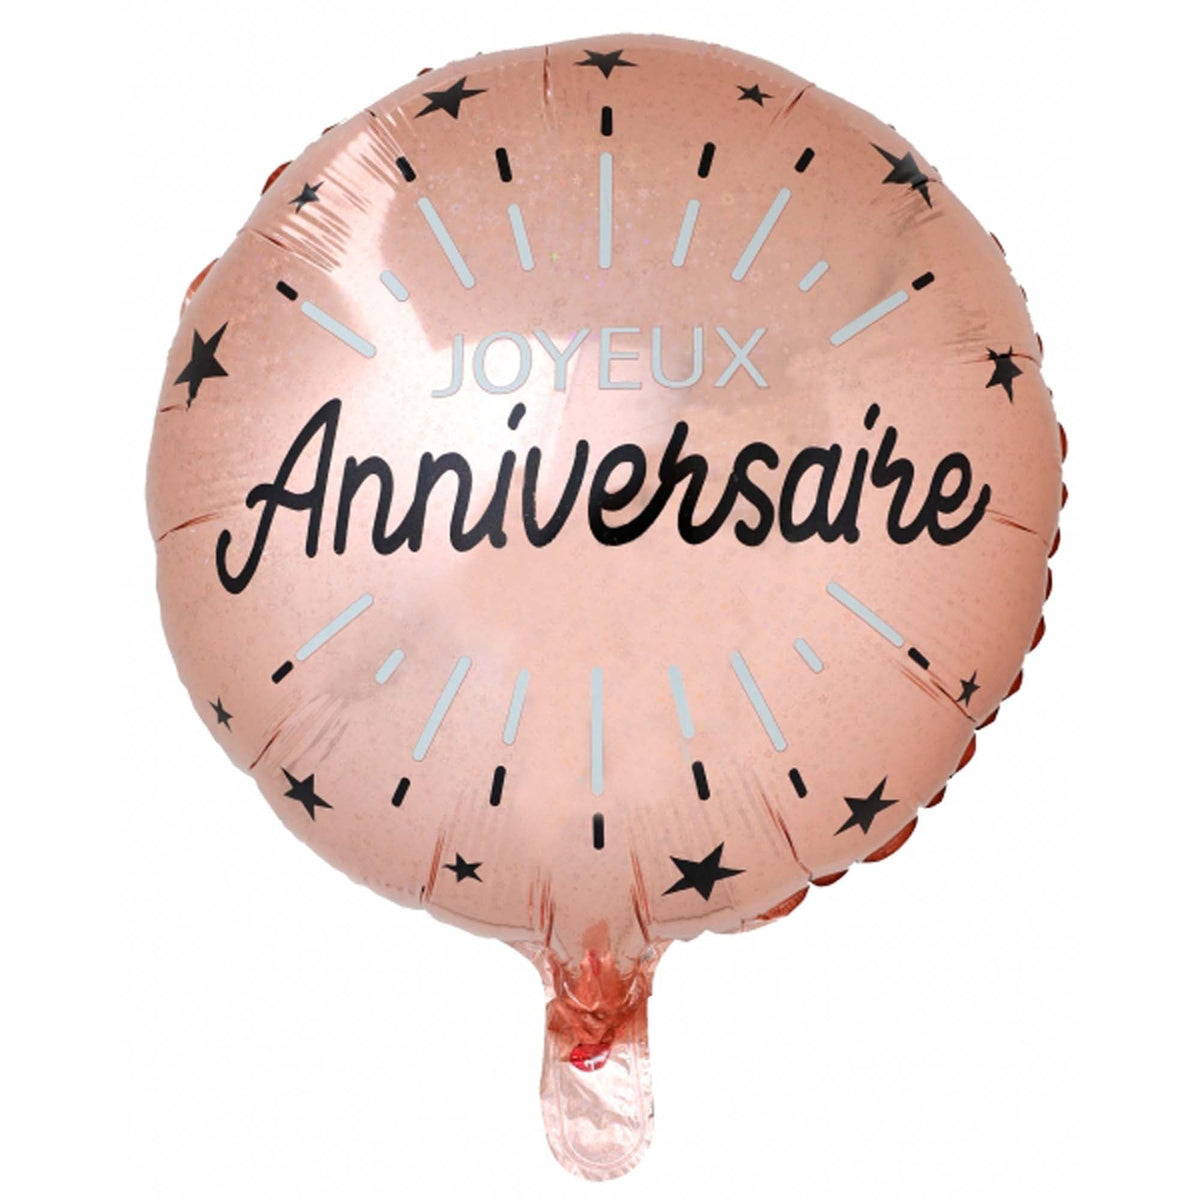 SANTEX Balloons "Joyeux Anniversaire" Birthday Round Foil Balloon, White and Rose Gold, 18 Inches, 1 Count